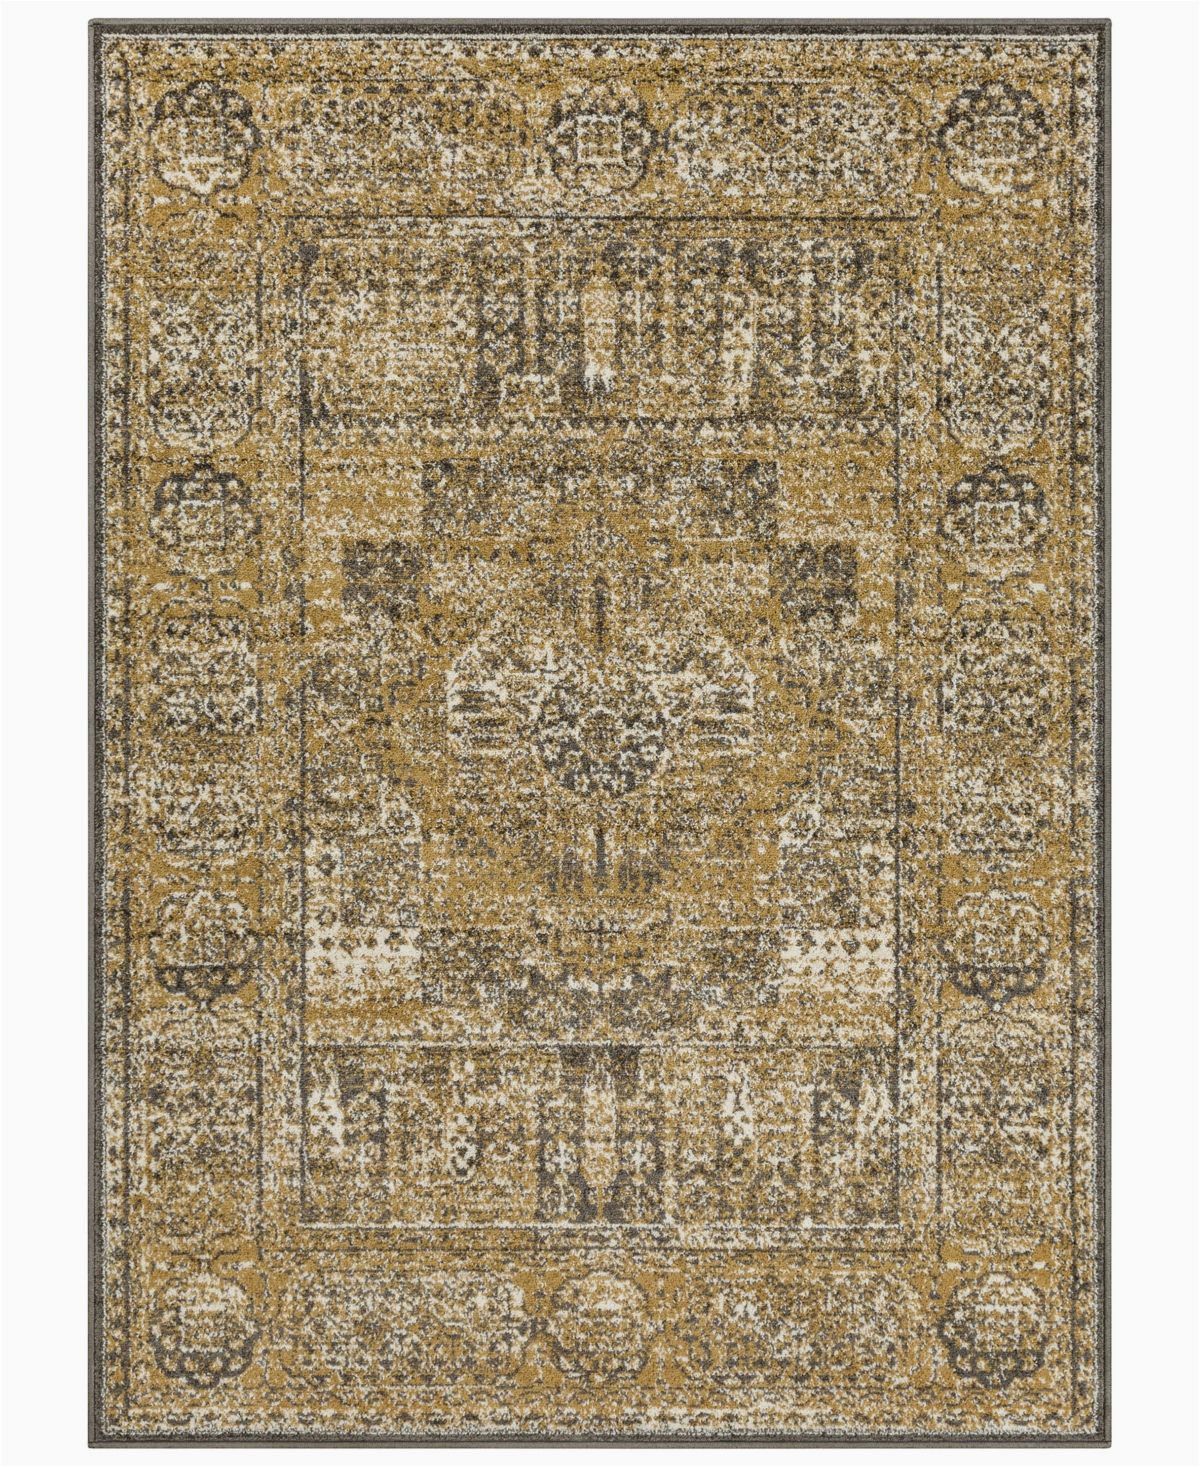 5 by 7 area Rugs at Lowes Surya Seville Sev 2328 Tan 5 3" X 7 3" area Rug & Reviews